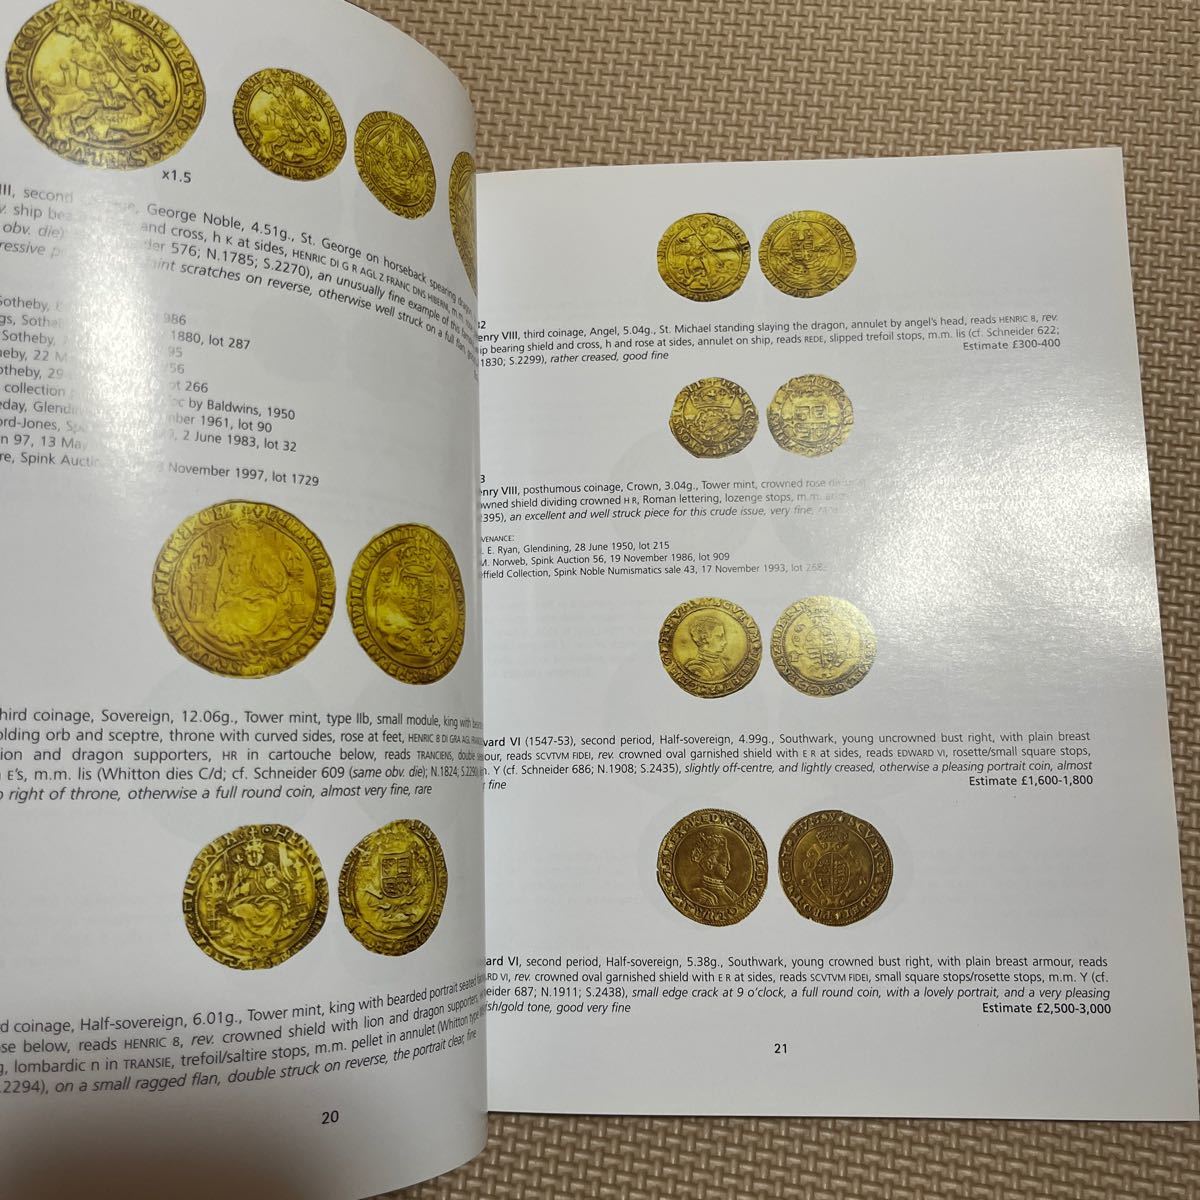 SPINK THE SAMUEL KING COLLECTION OF HIGHLY IMPORTANT ENGLISH GOLD COINS 2005 カタログ コイン メダル 硬貨 金貨 コレクションの画像3